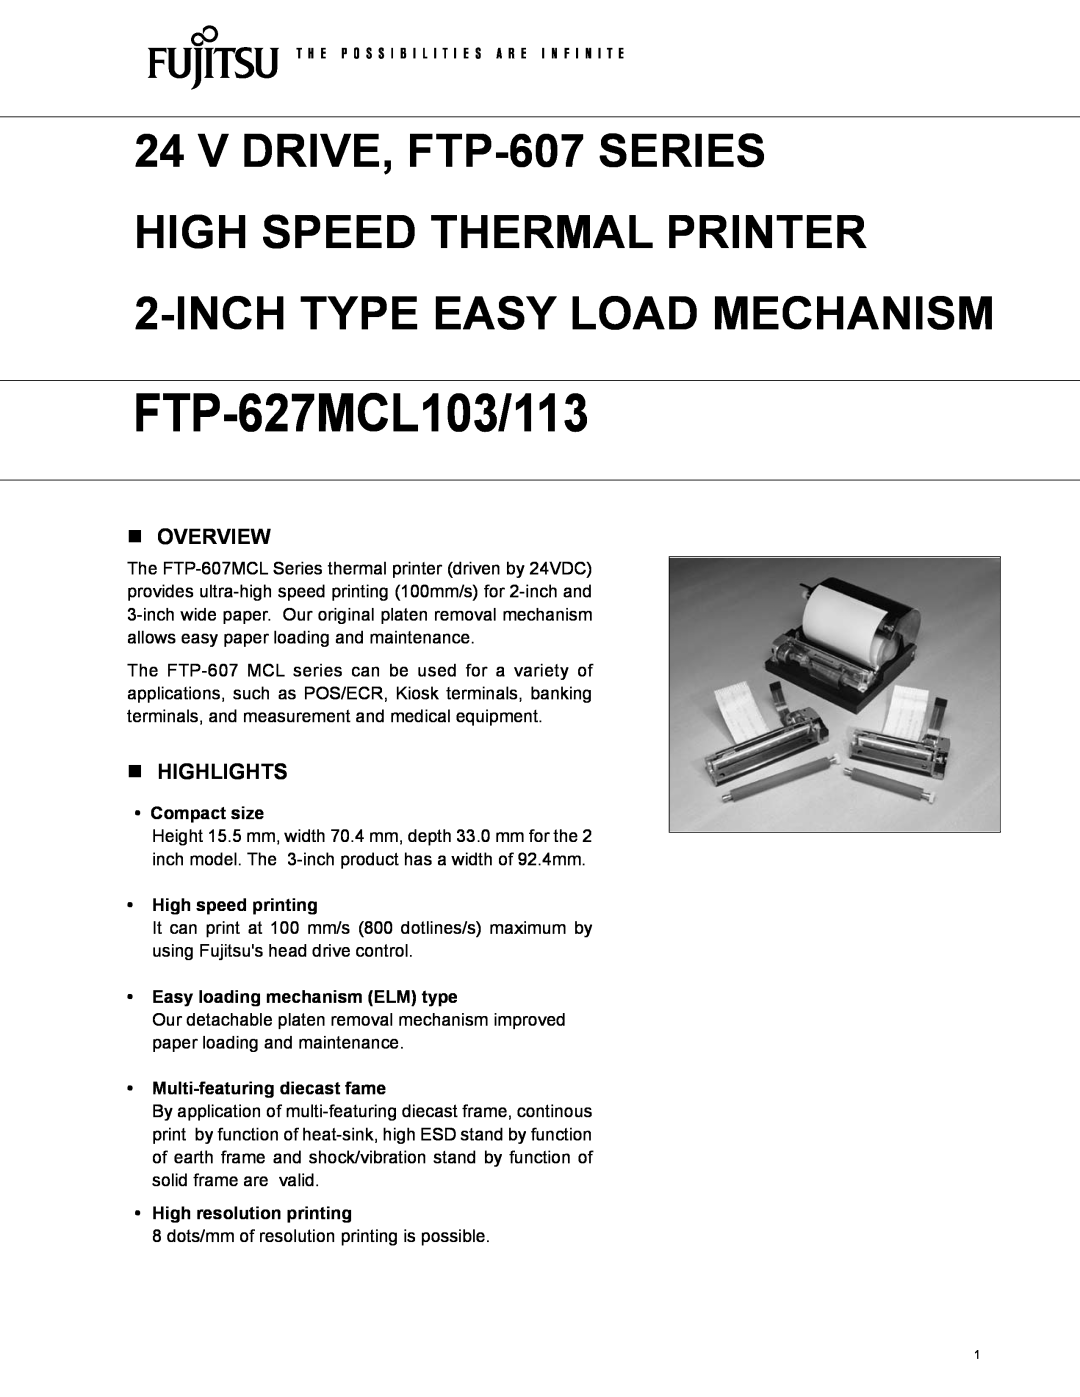 Fujitsu FTP-627MCL113 manual n Overview, n HIGHLIGHTS, Compact size, High speed printing, Easy loading mechanism ELM type 